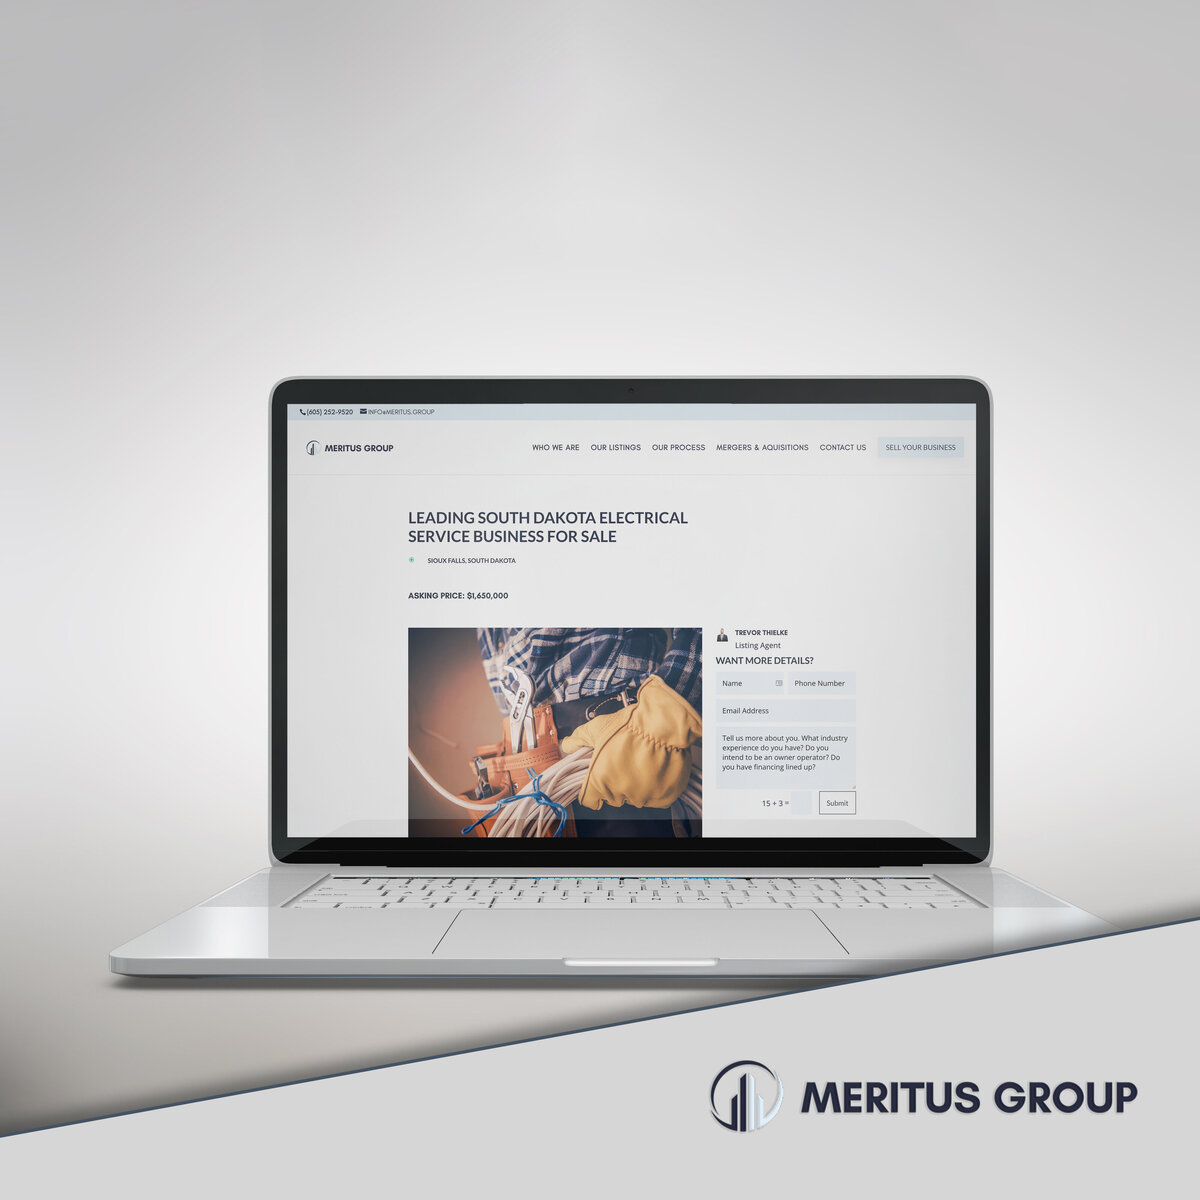 Capitalize on The Agency's innovative social media strategies to enhance Meritus Group's digital engagement. We deliver content that resonates and builds lasting client relationships.